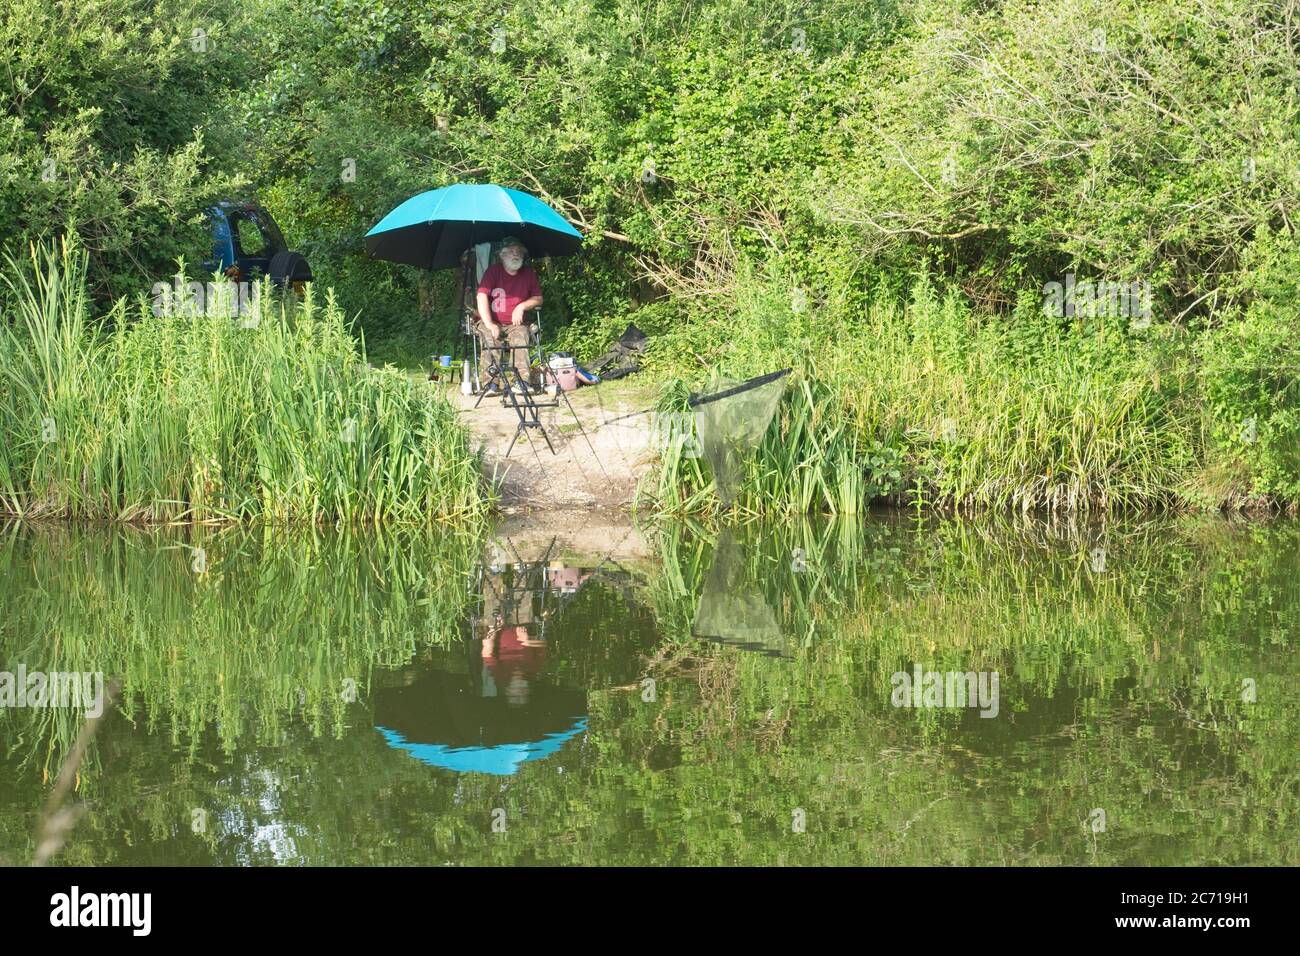 Coarse angler fishing from water's edge of pond Umbrella sunshade, surrounded by vegetation Reflection of angler and umbrella in the water below Sunny Stock Photo